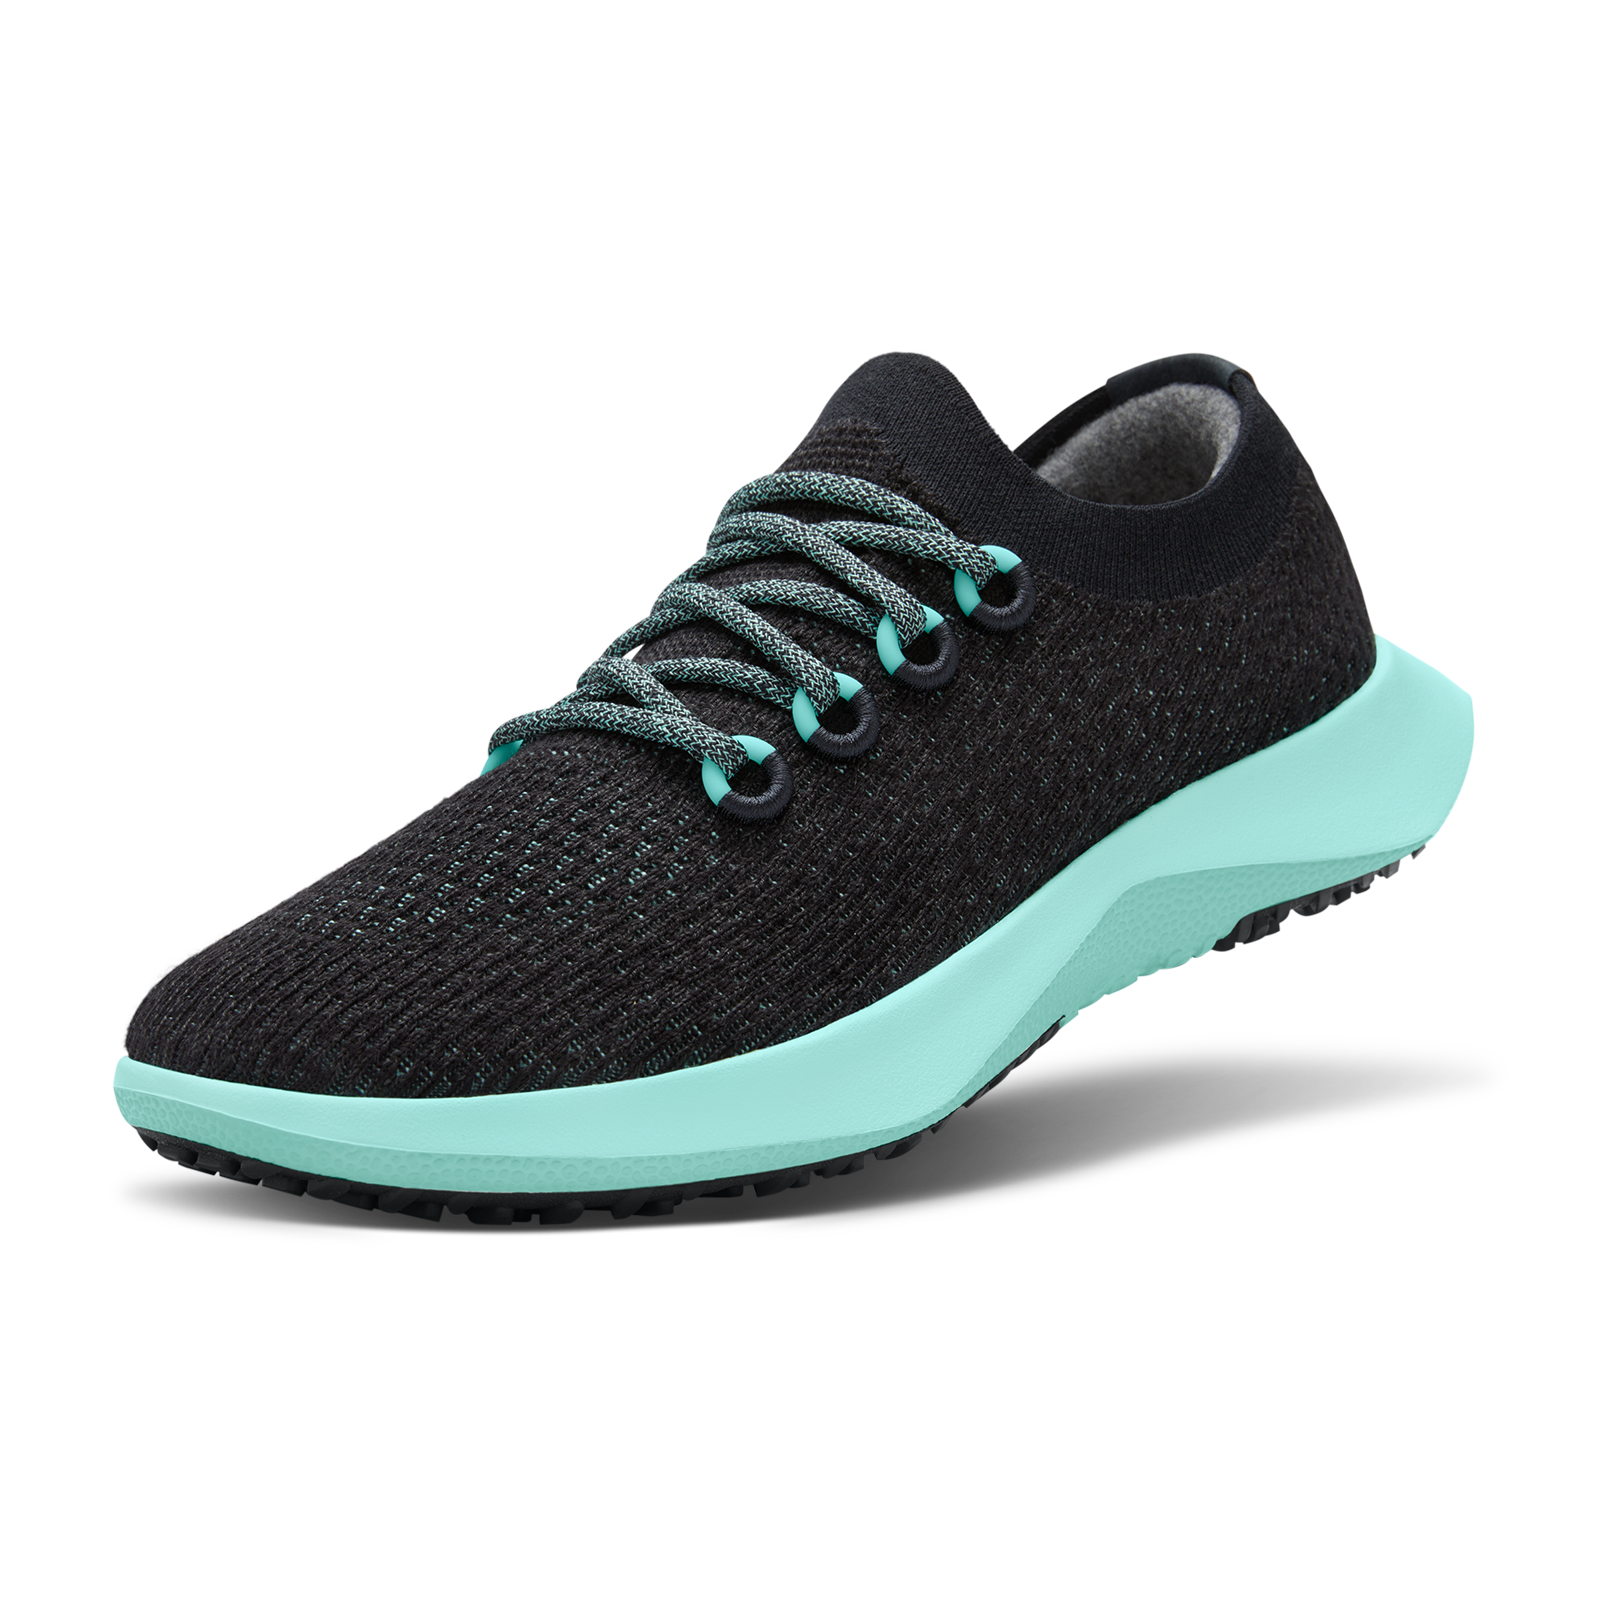 Women's Tree Dasher 2 - Natural Black (Buoyant Mint Sole)